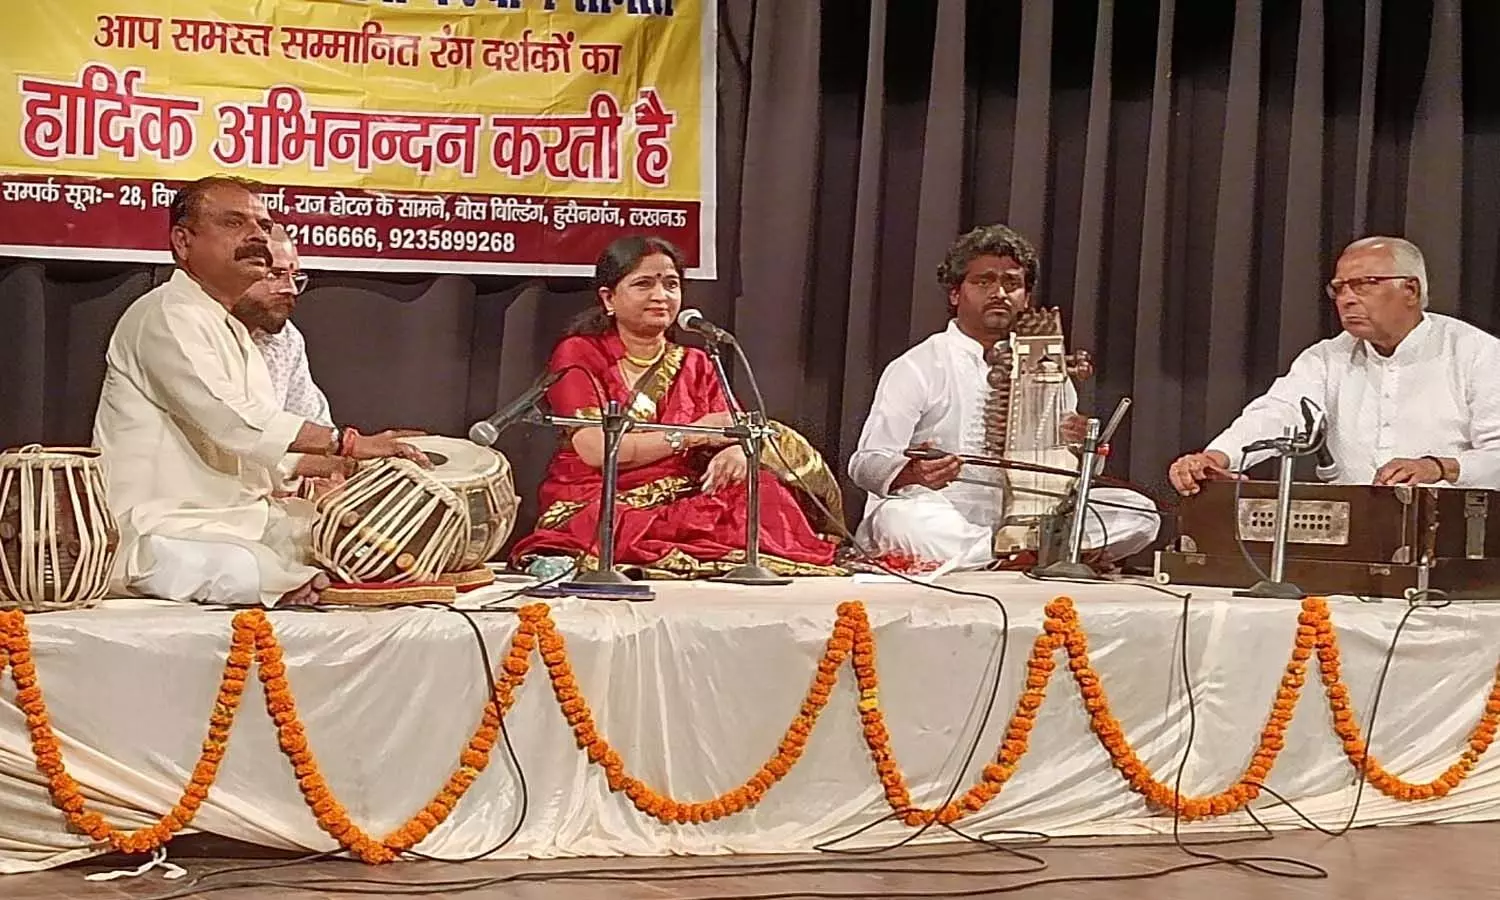 In SNA, the melody was tied, Judge Ashok Gupta said - Classical music should not be adulterated